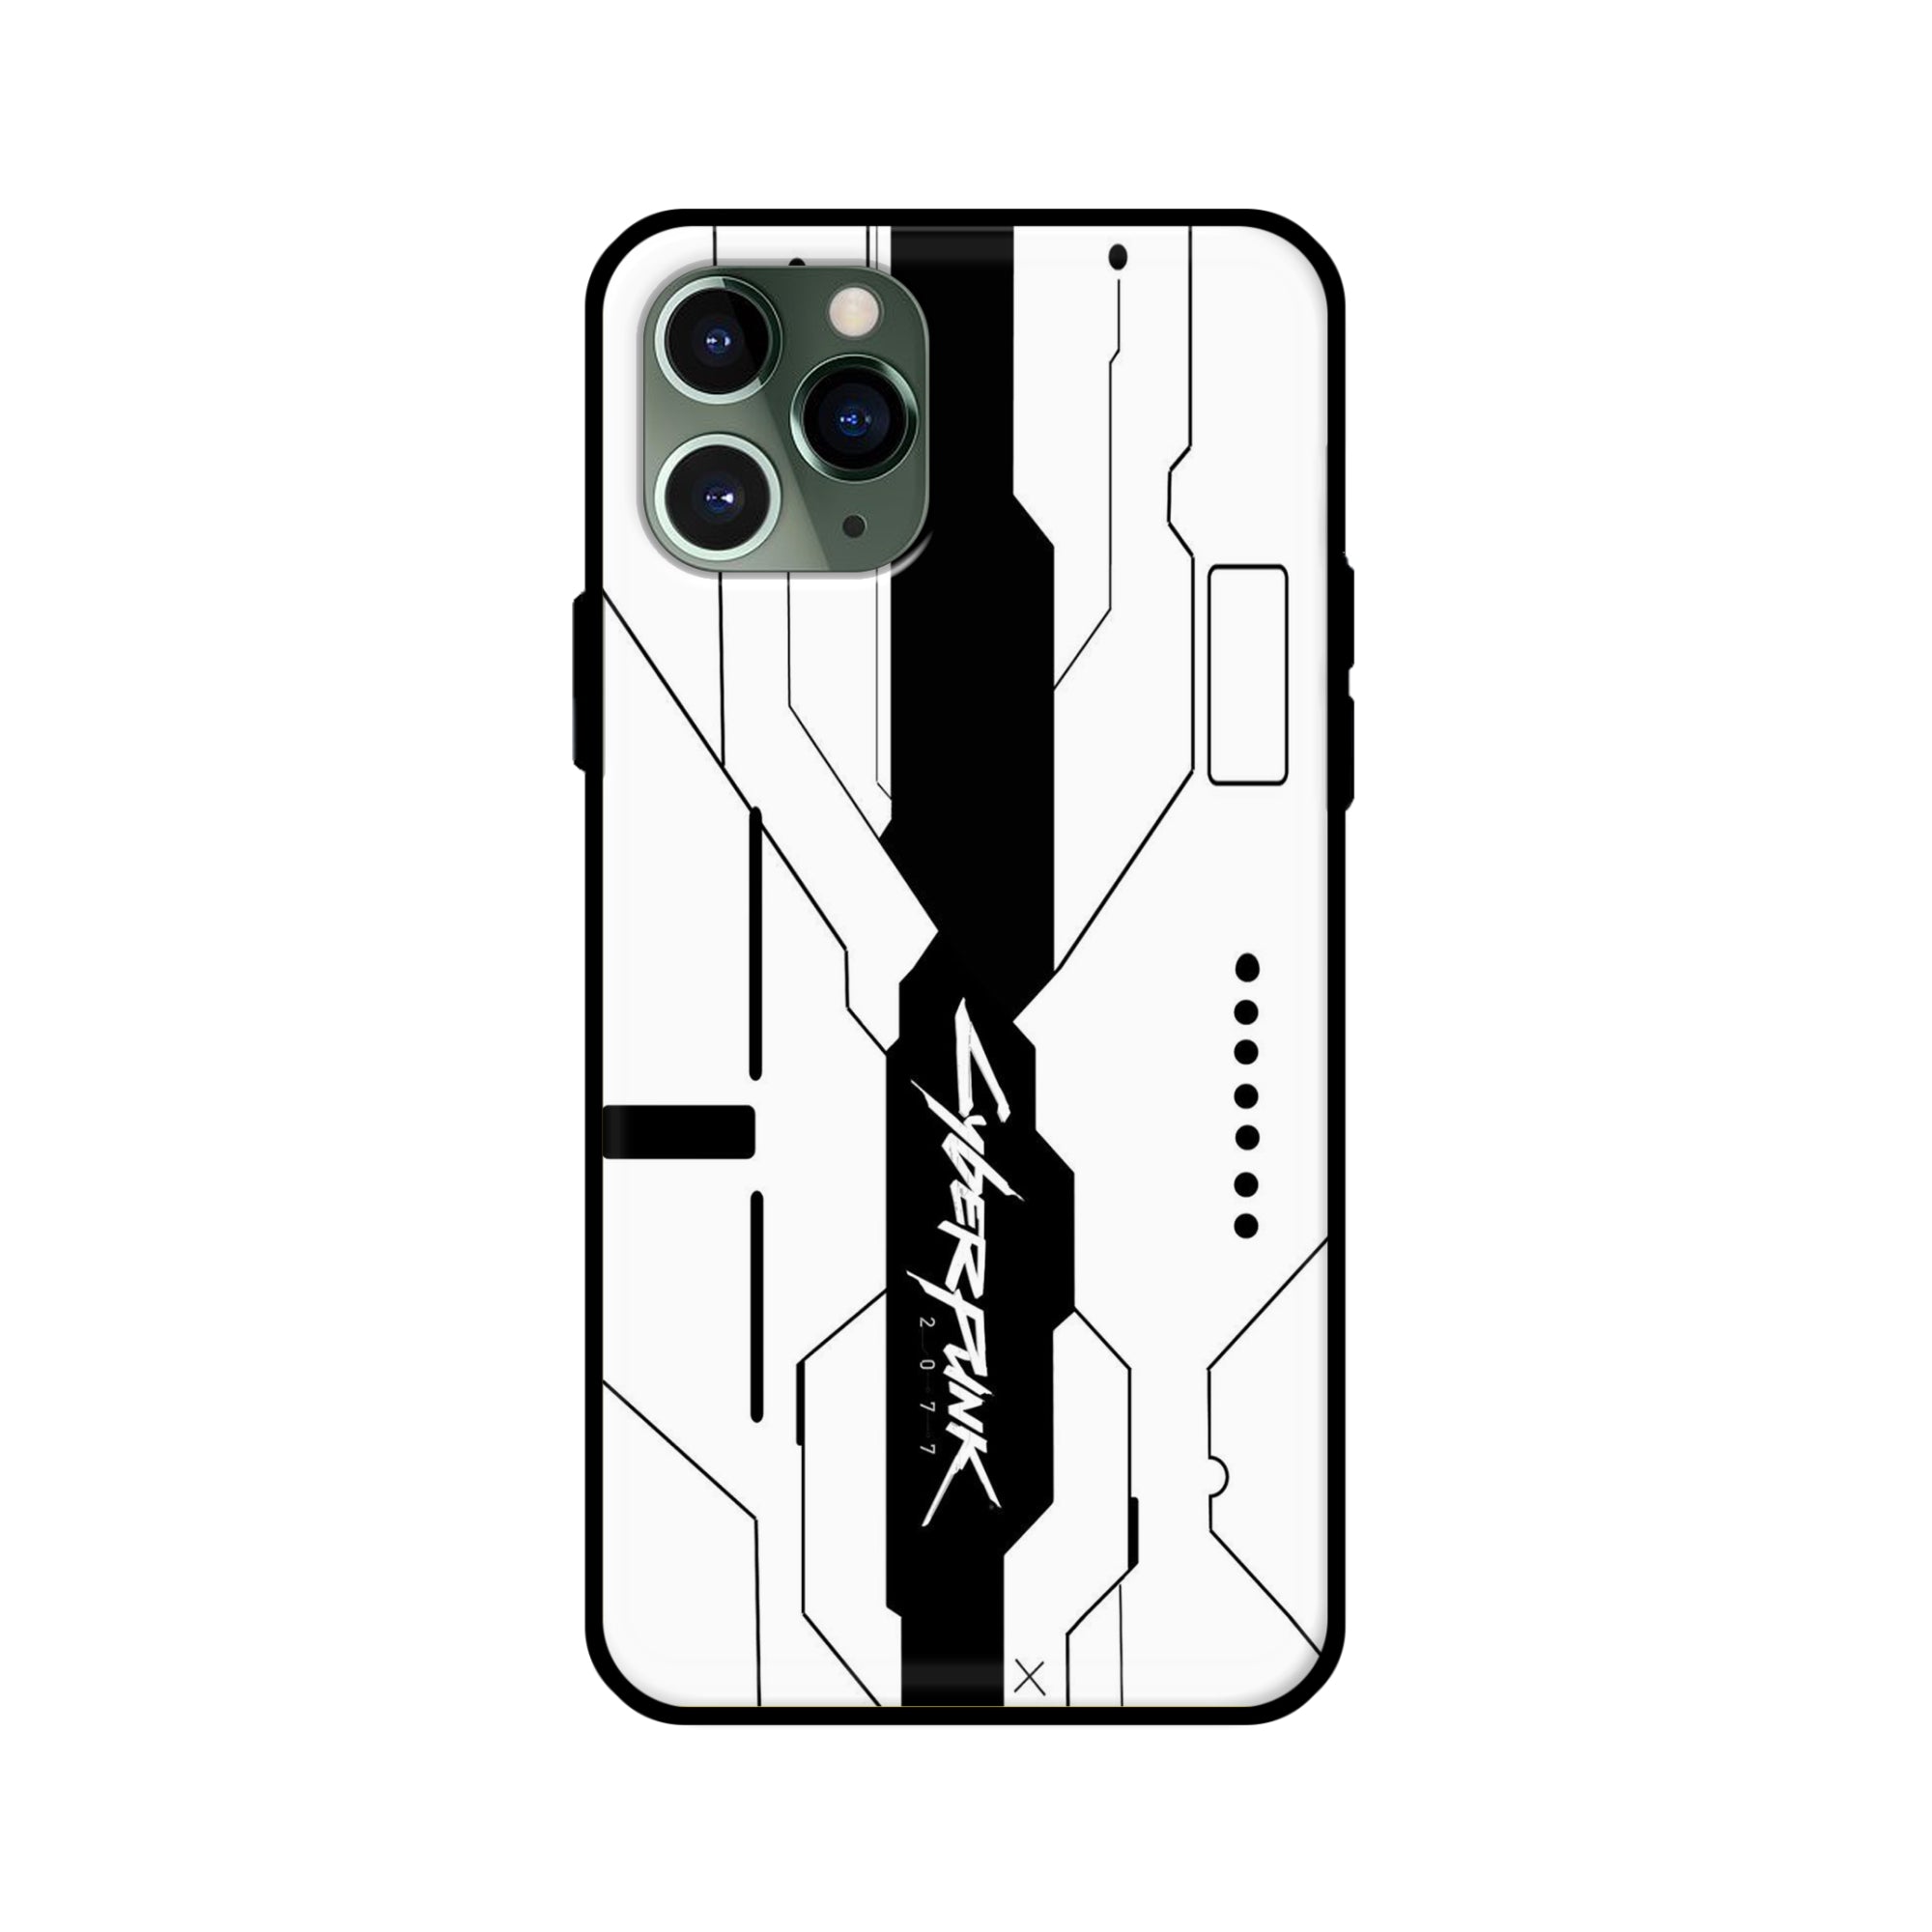 Buy Cyberpunk 2077 Glass/Metal Back Mobile Phone Case/Cover For iPhone 11 Pro Online